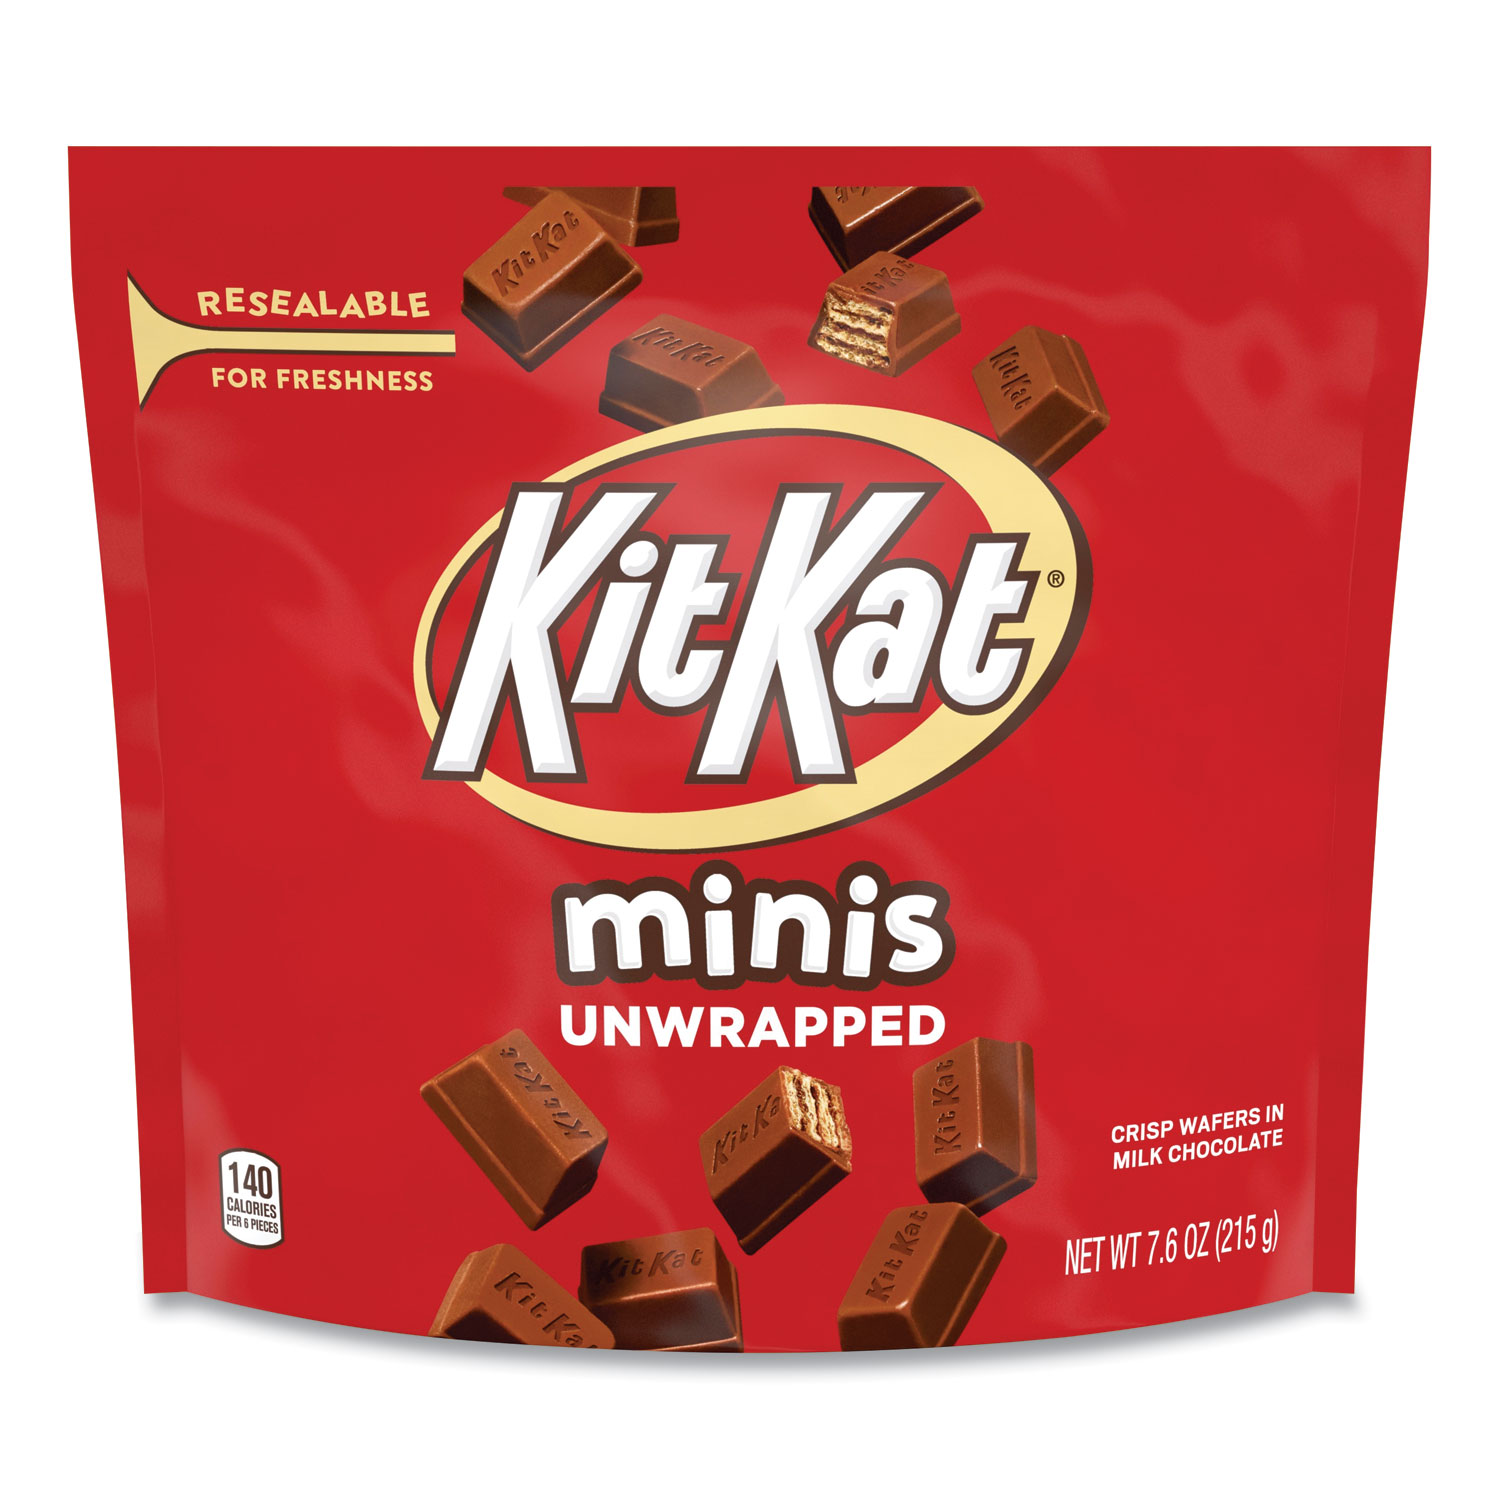  Kit Kat 99662 Minis Unwrapped Wafer Bars, 7.6 oz Bag, Milk Chocolate, 3/Pack, Free Delivery in 1-4 Business Days (GRR24600430) 